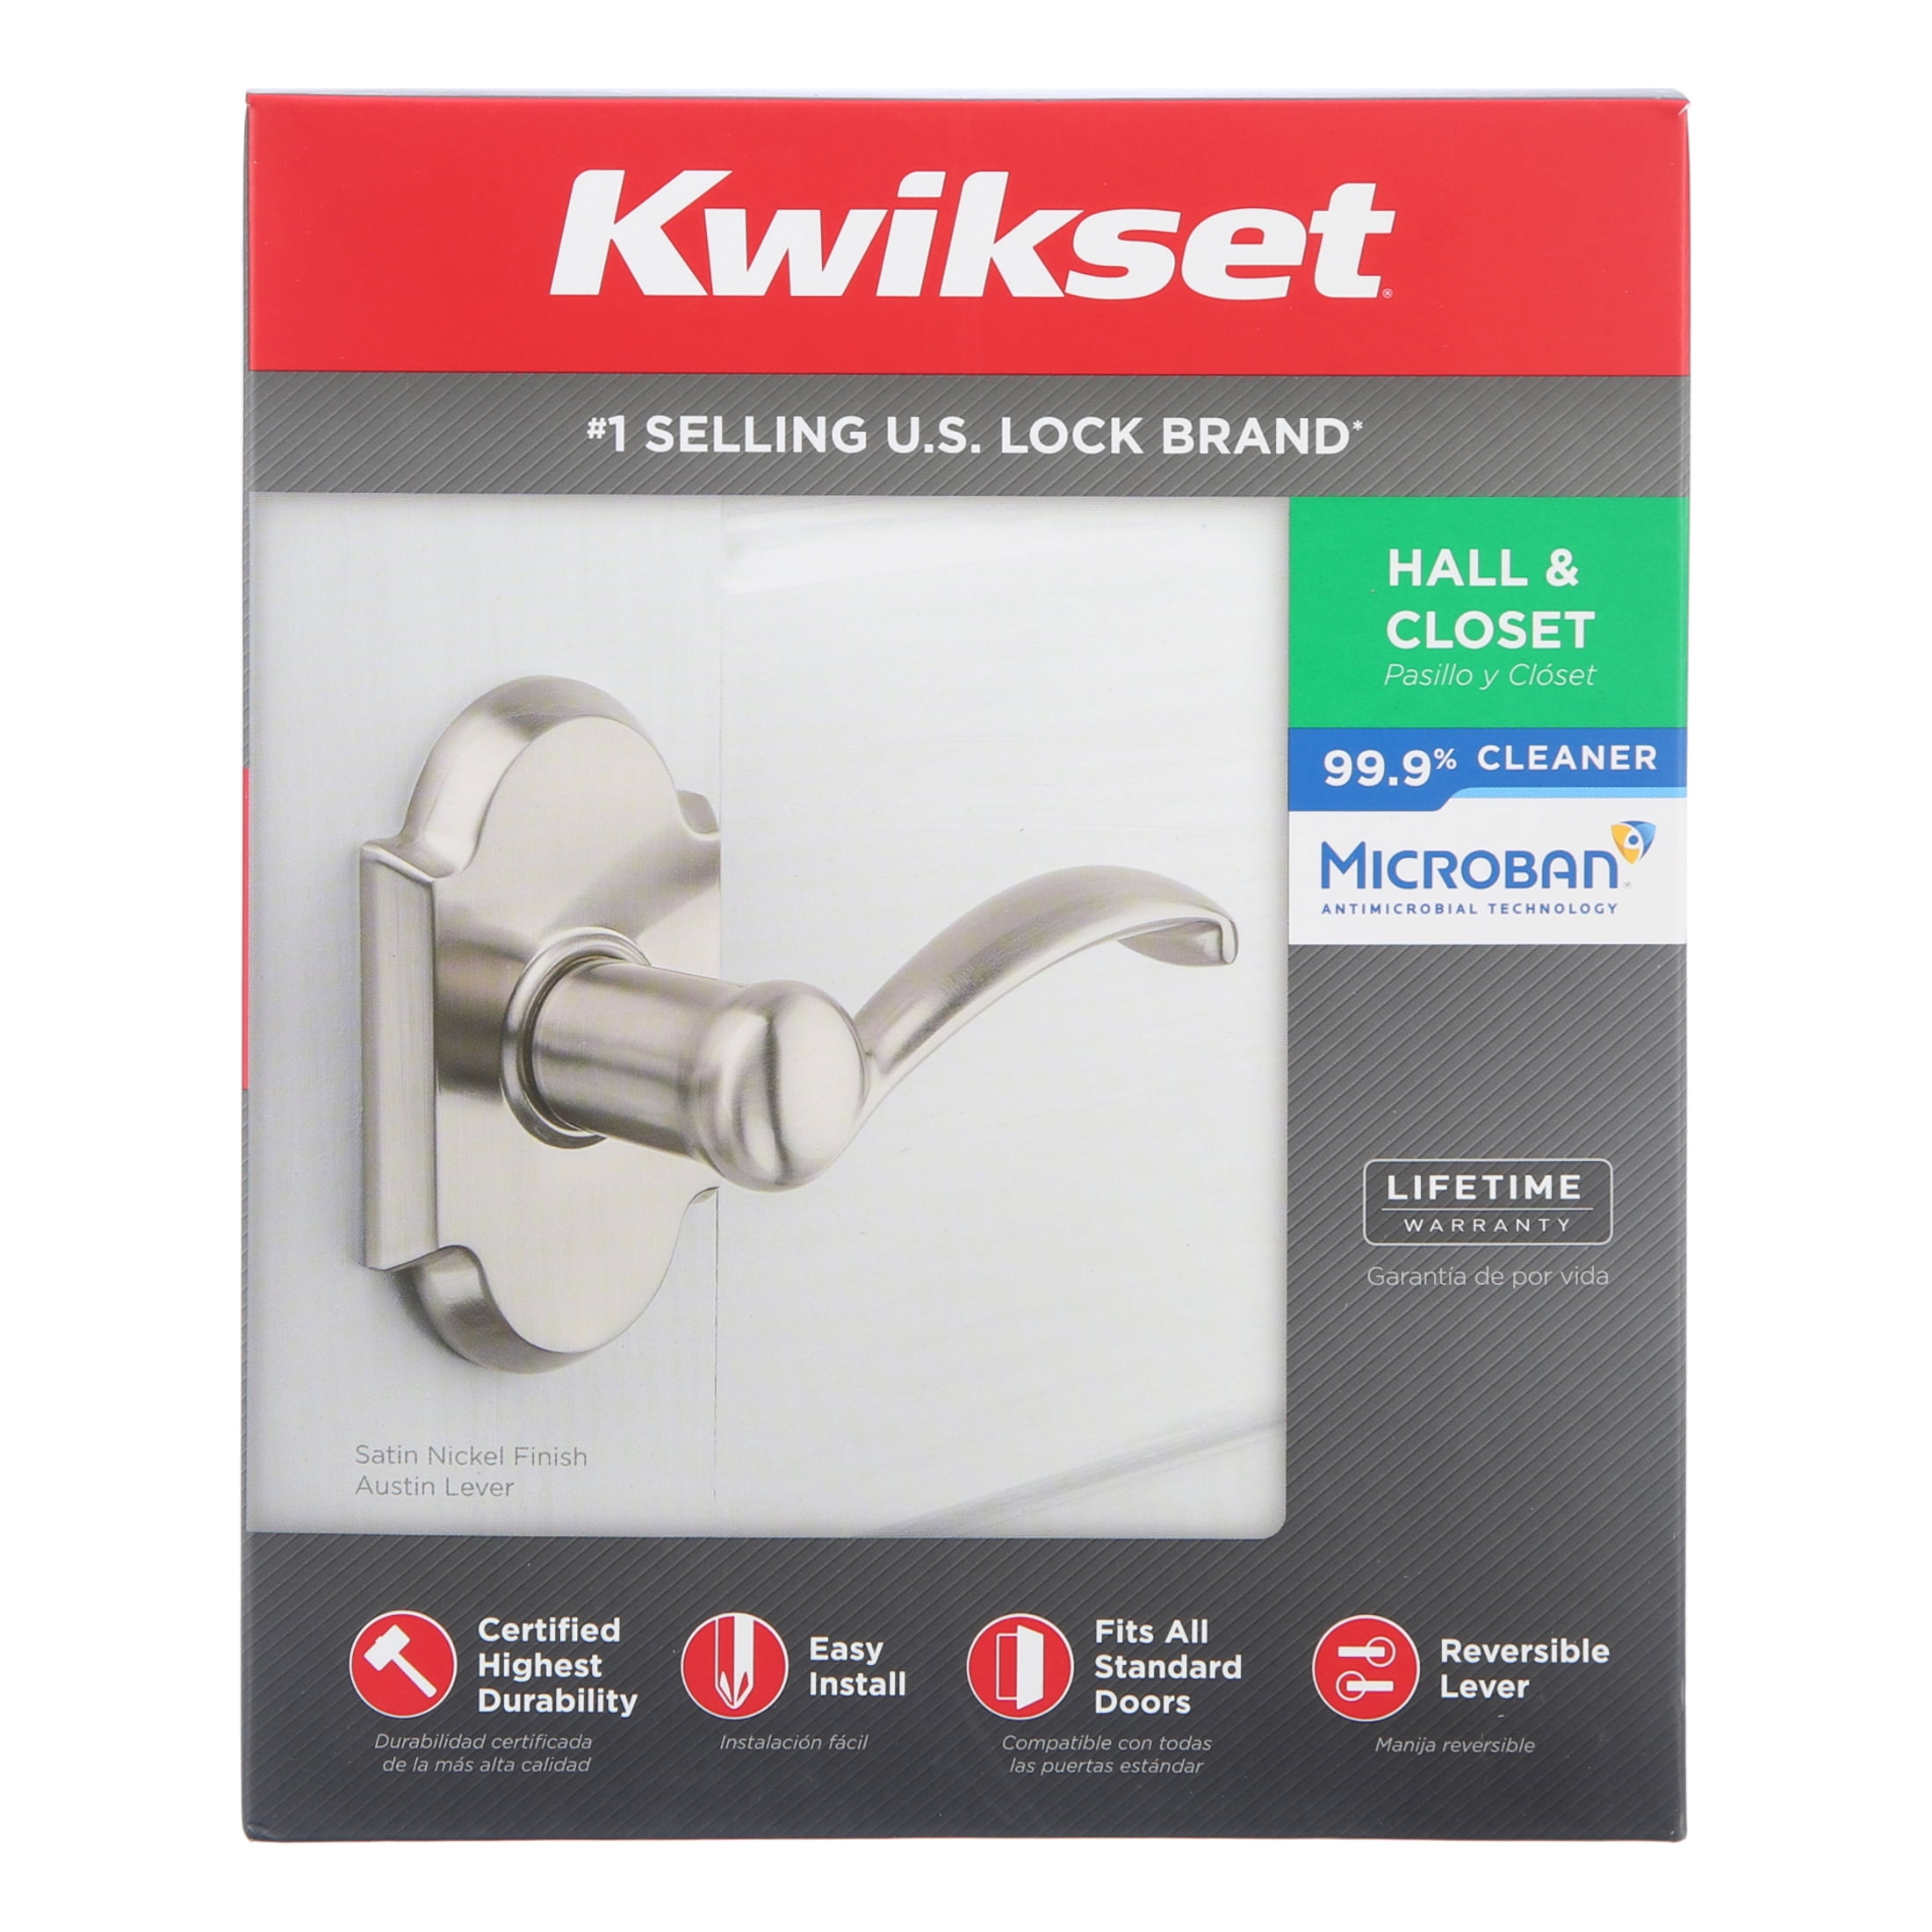 NEW IN BOX Kwikset 97200-771 Satin Nickel Austin Hall & Closet Lever ARCHED 